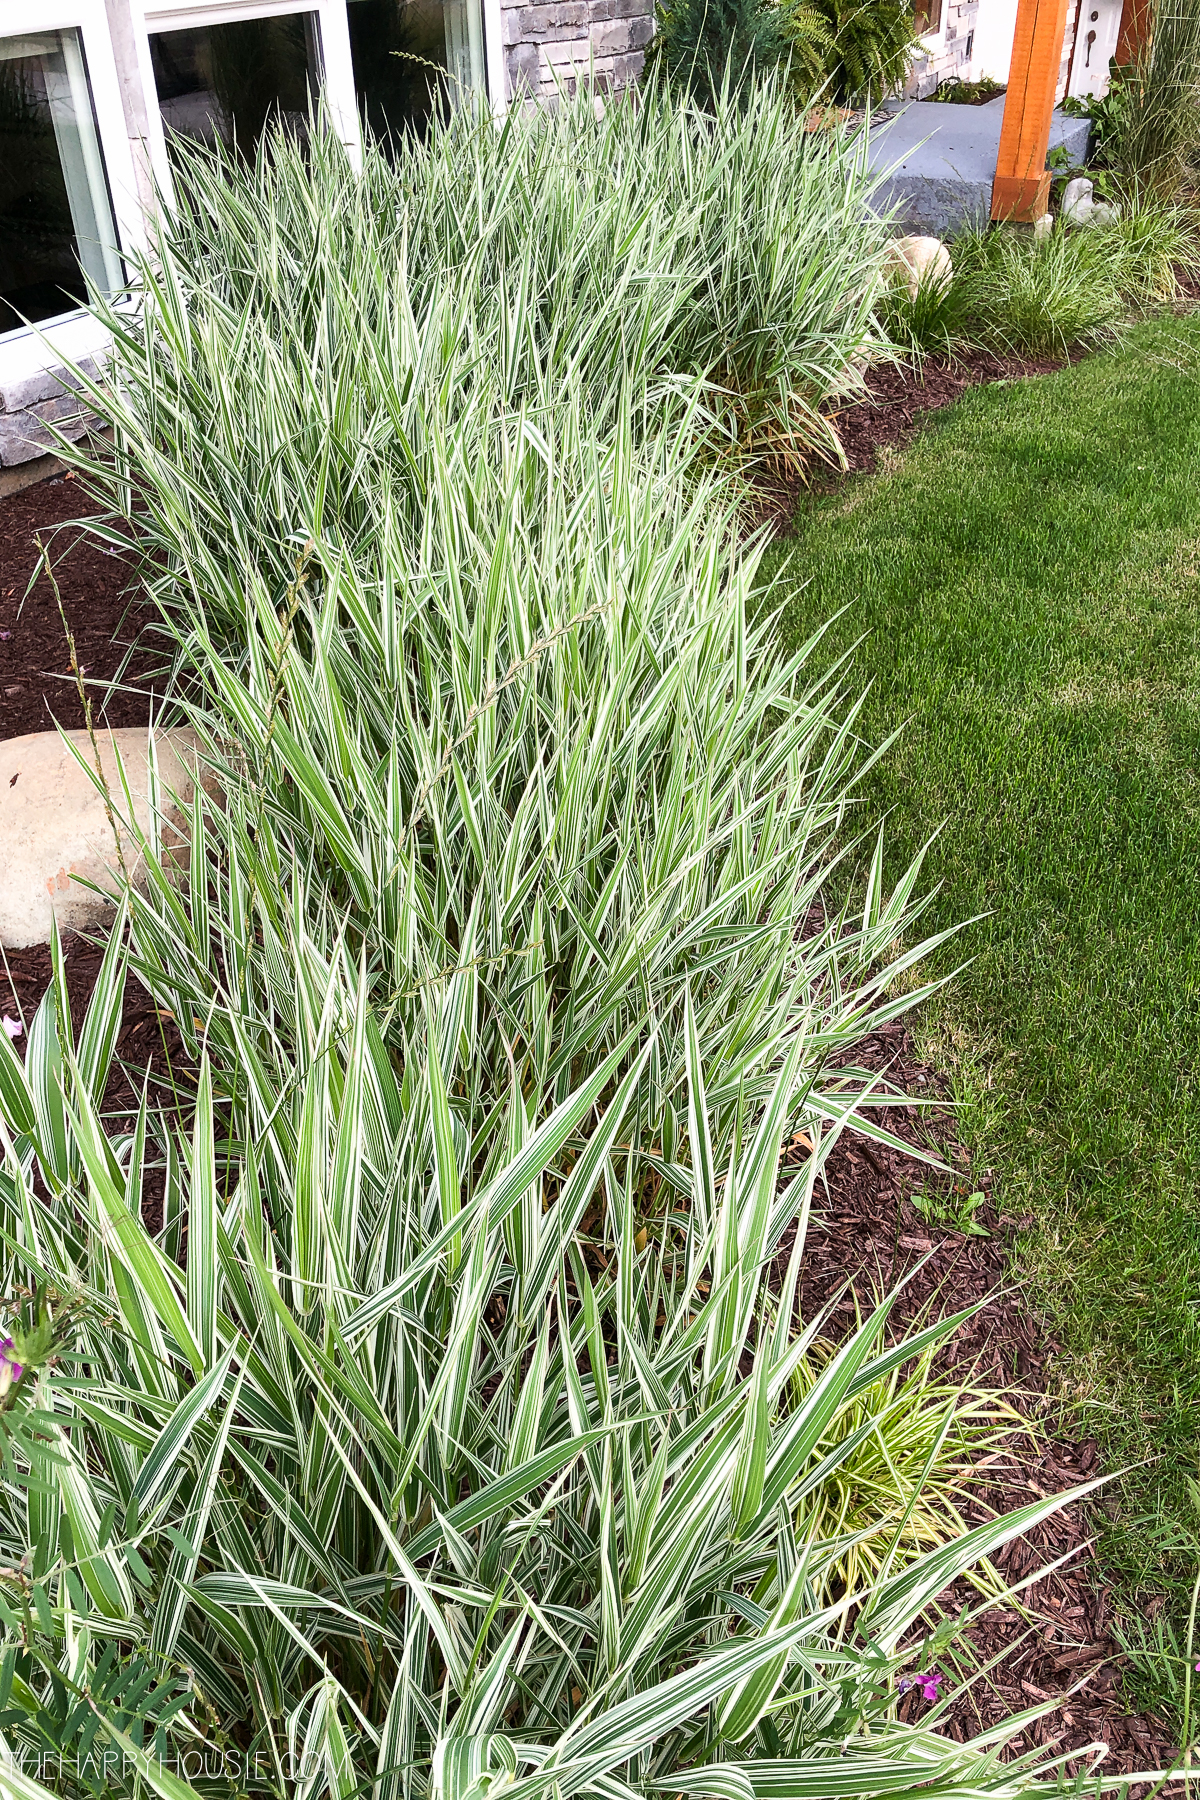 How to Use Ornamental Grasses in Your Landscaping